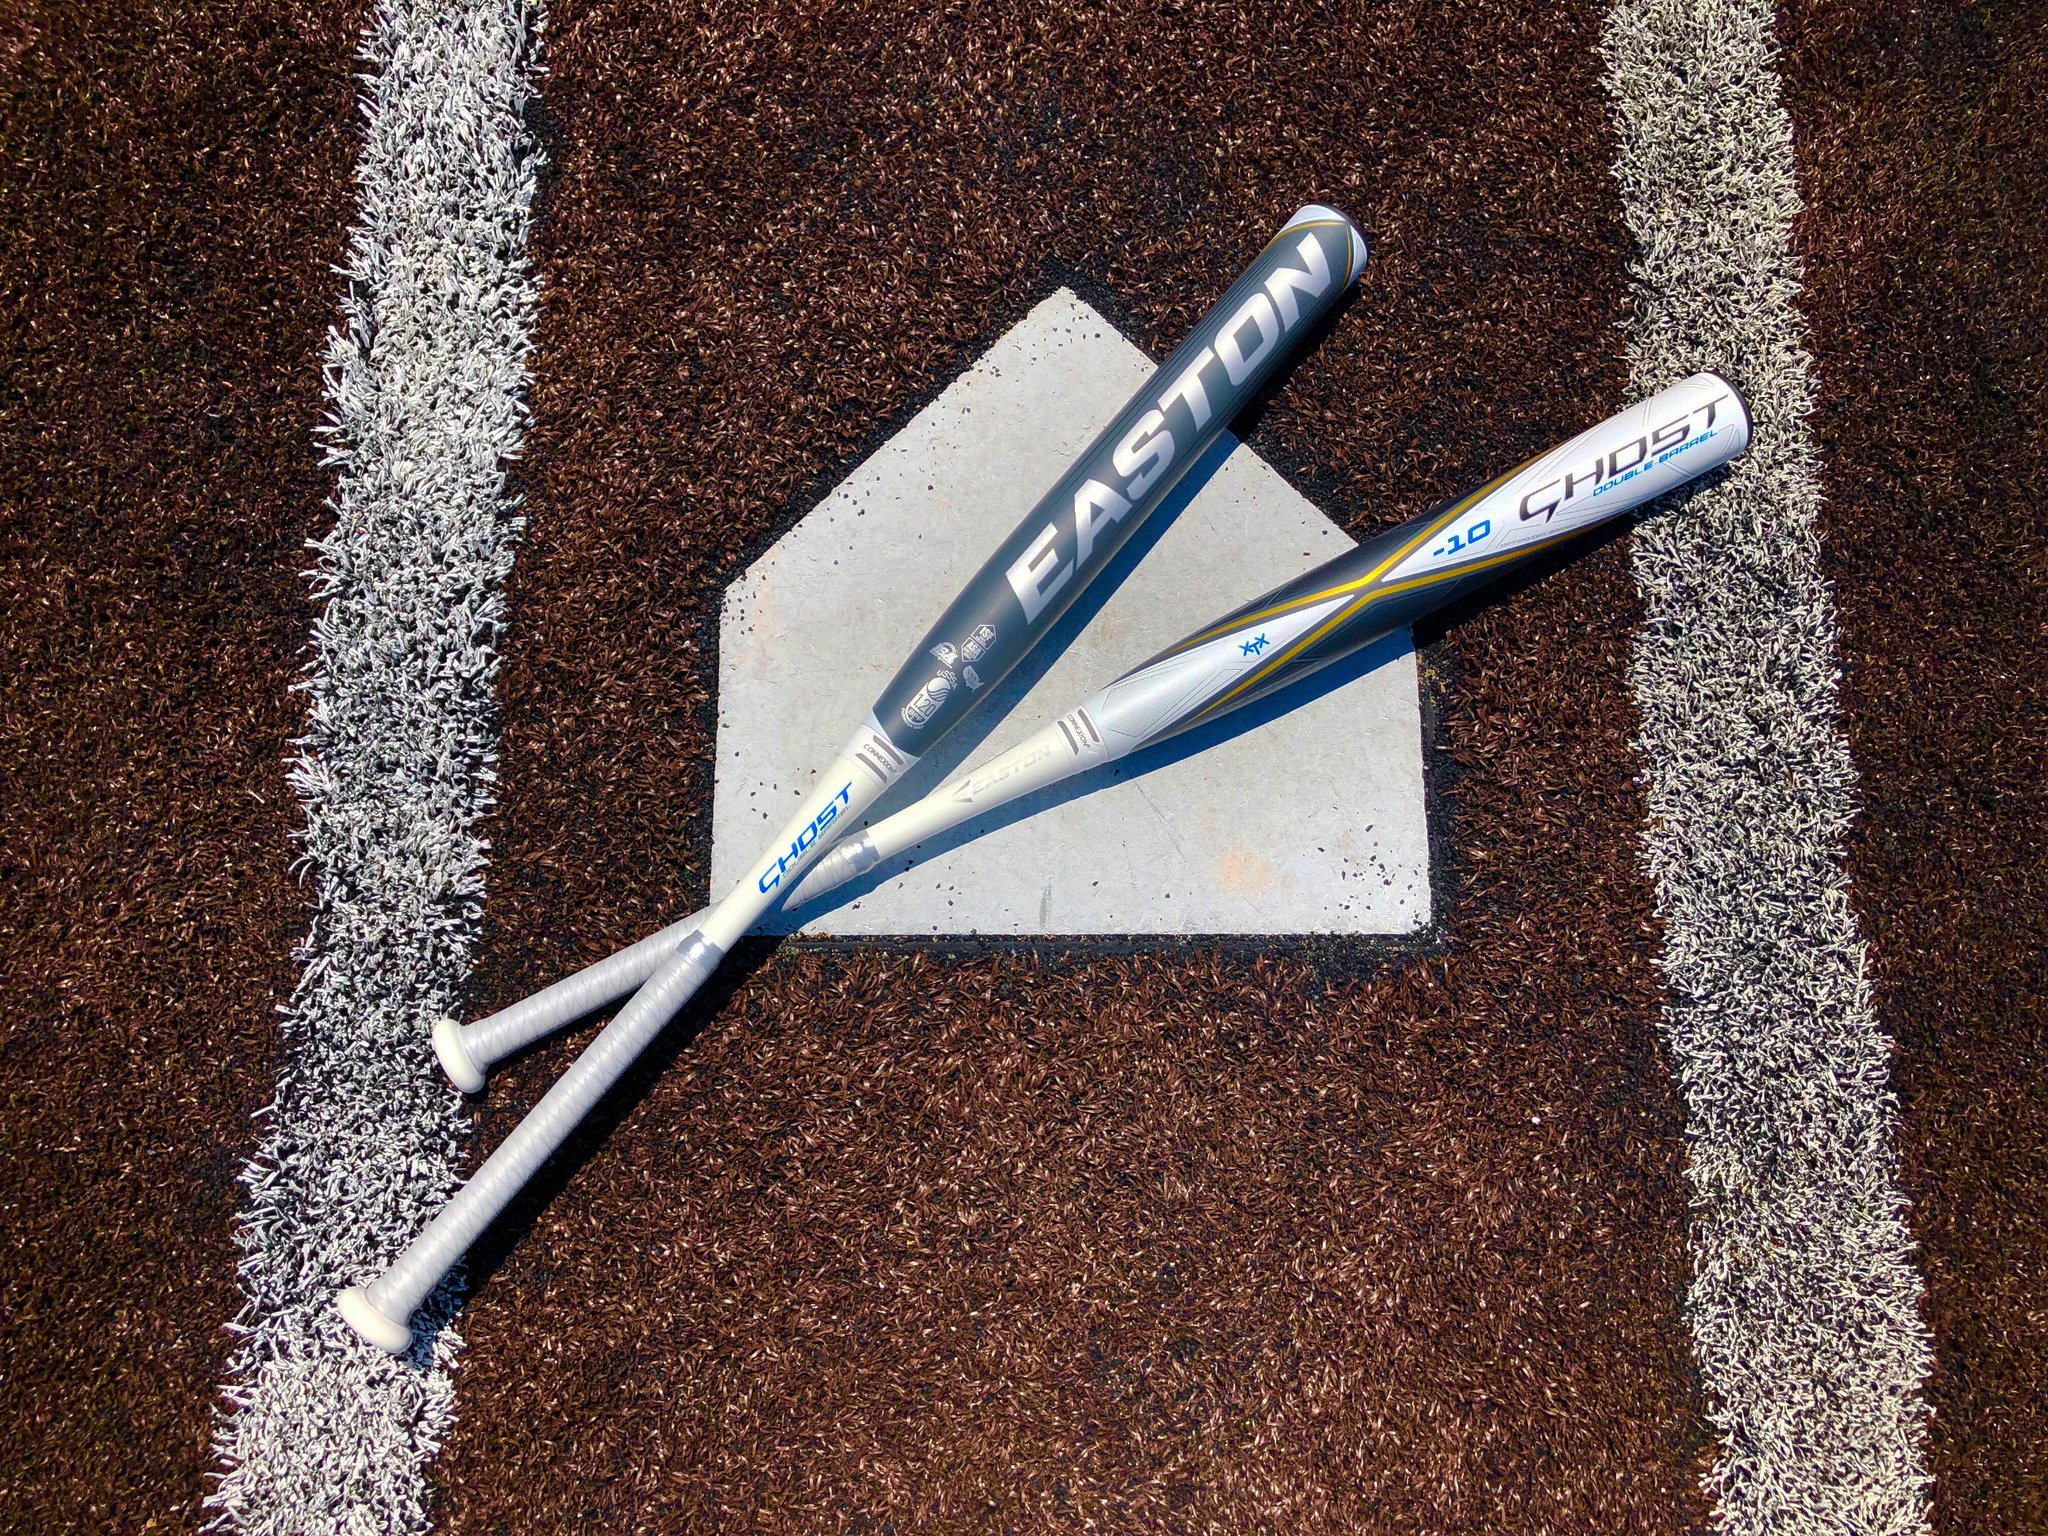 Bat Review: 2020 Easton Ghost Dual Stamp Fastpitch Bat